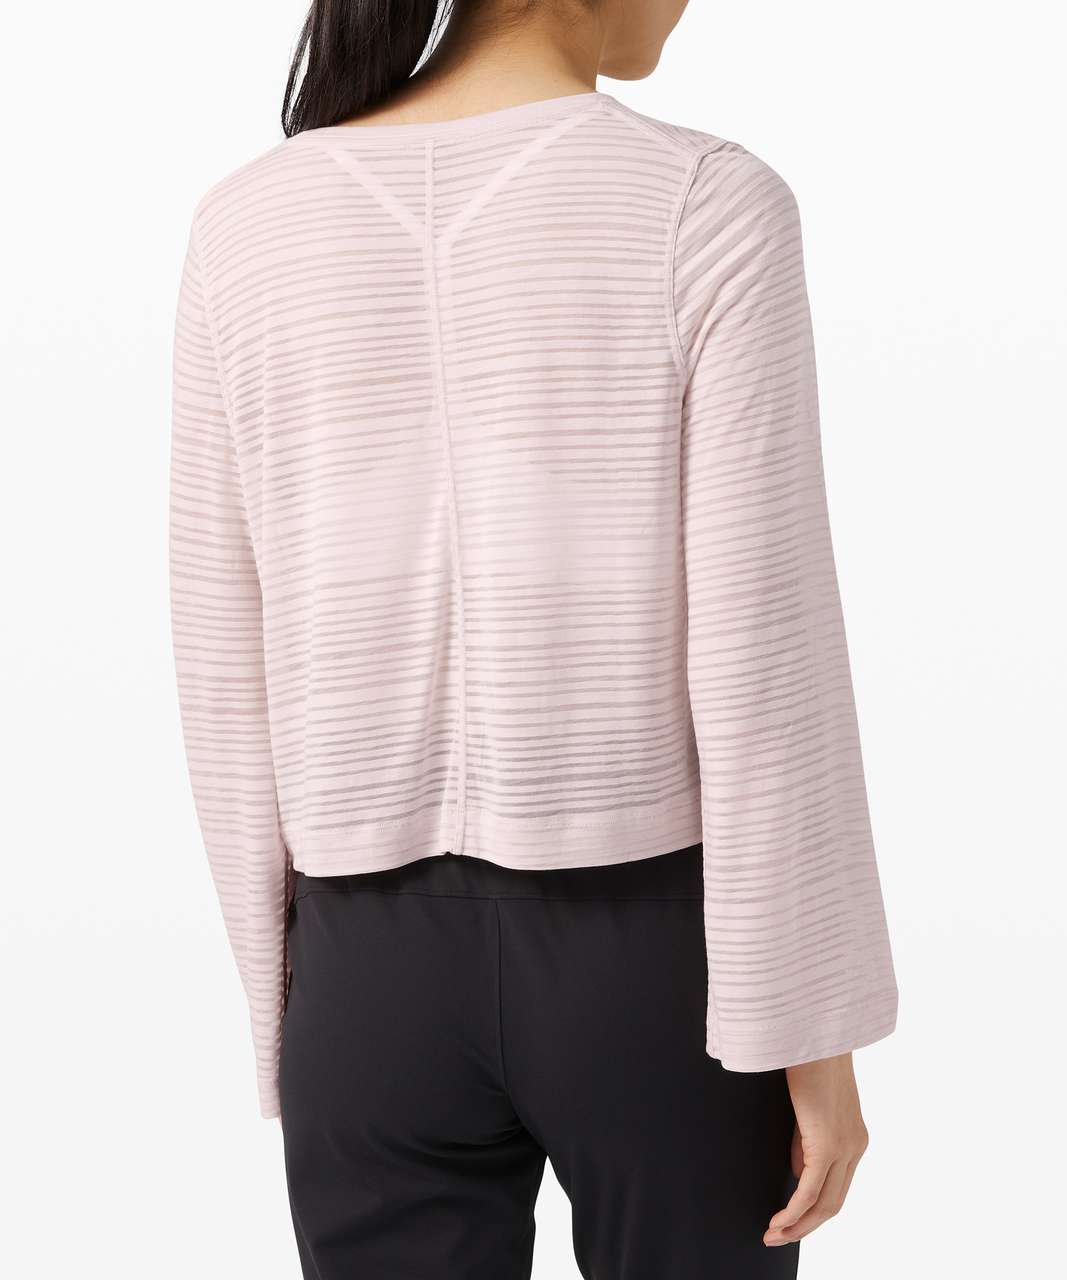 Lululemon Clear and Present Long Sleeve - Misty Pink